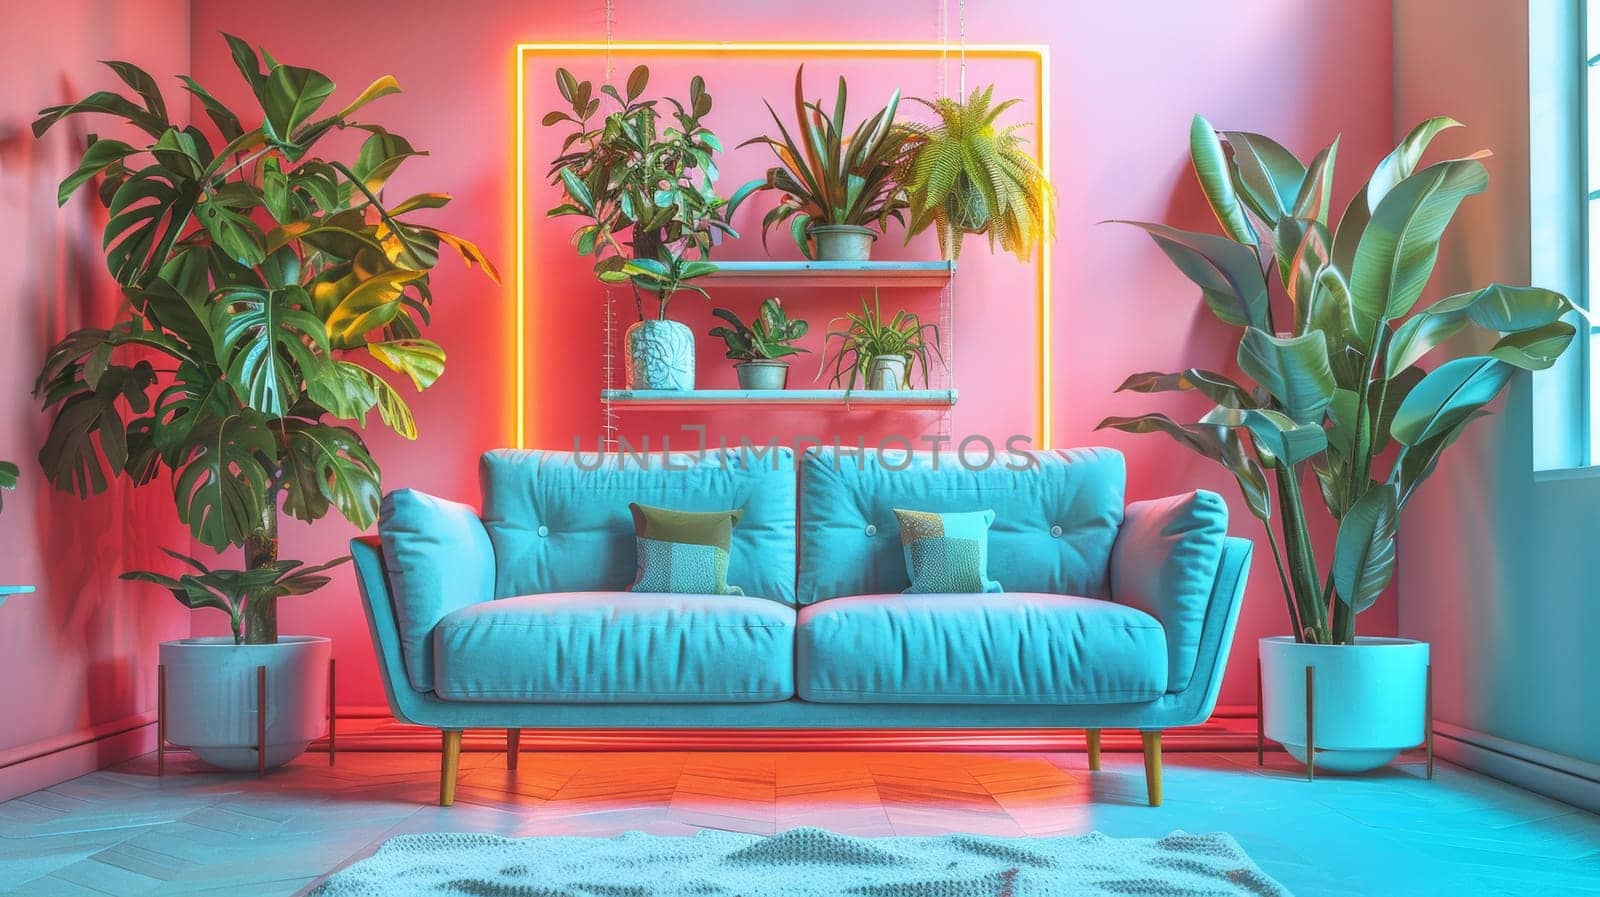 A blue couch in a pink room with plants on the wall